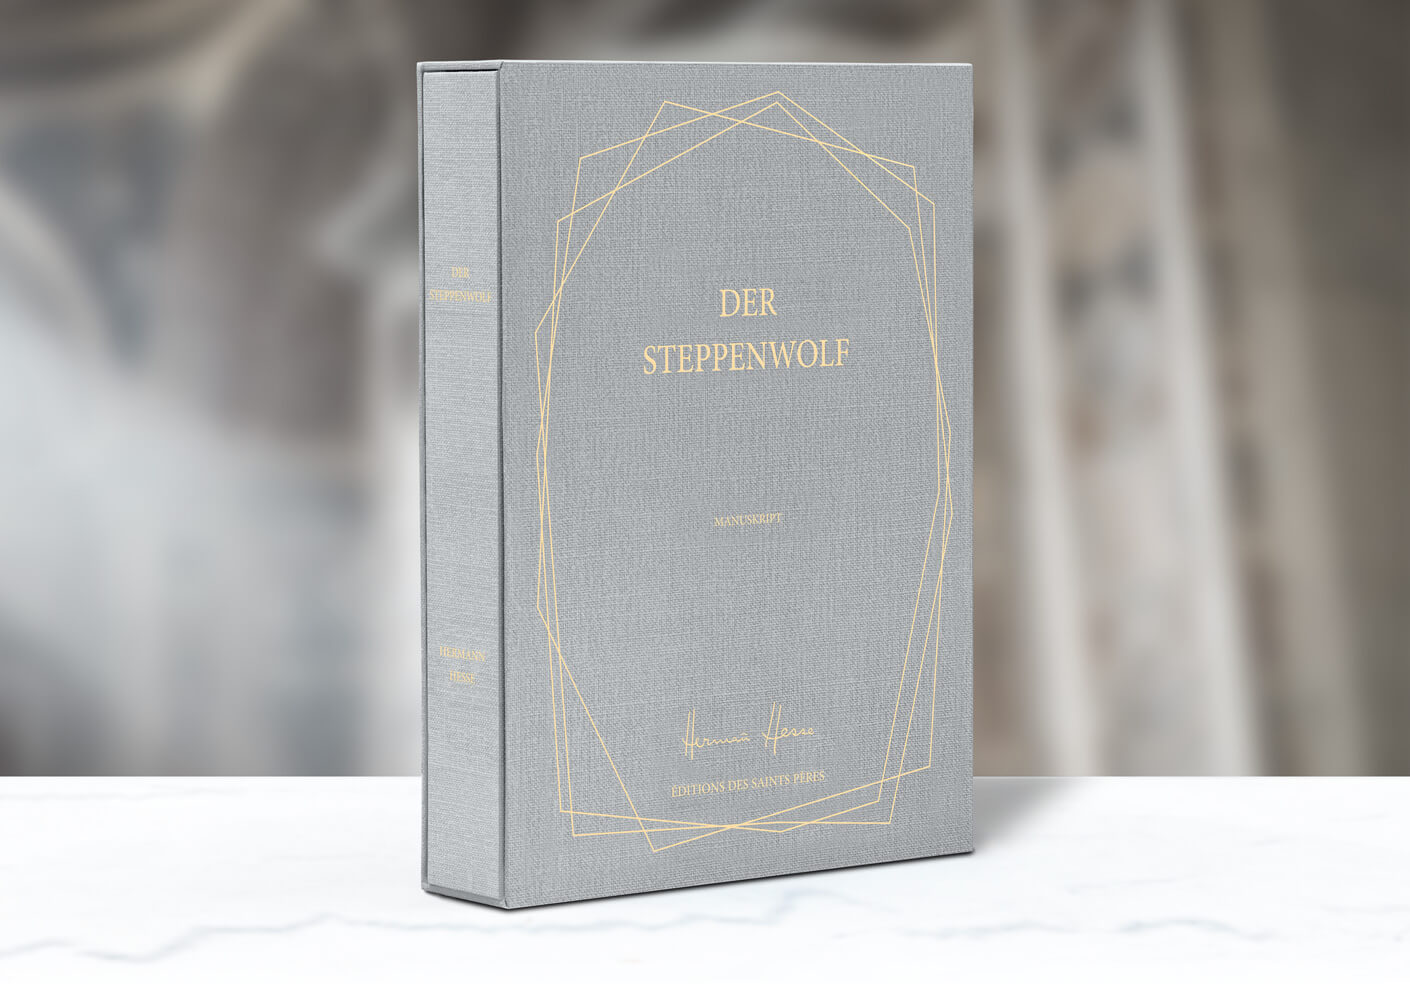 The Steppenwolf book